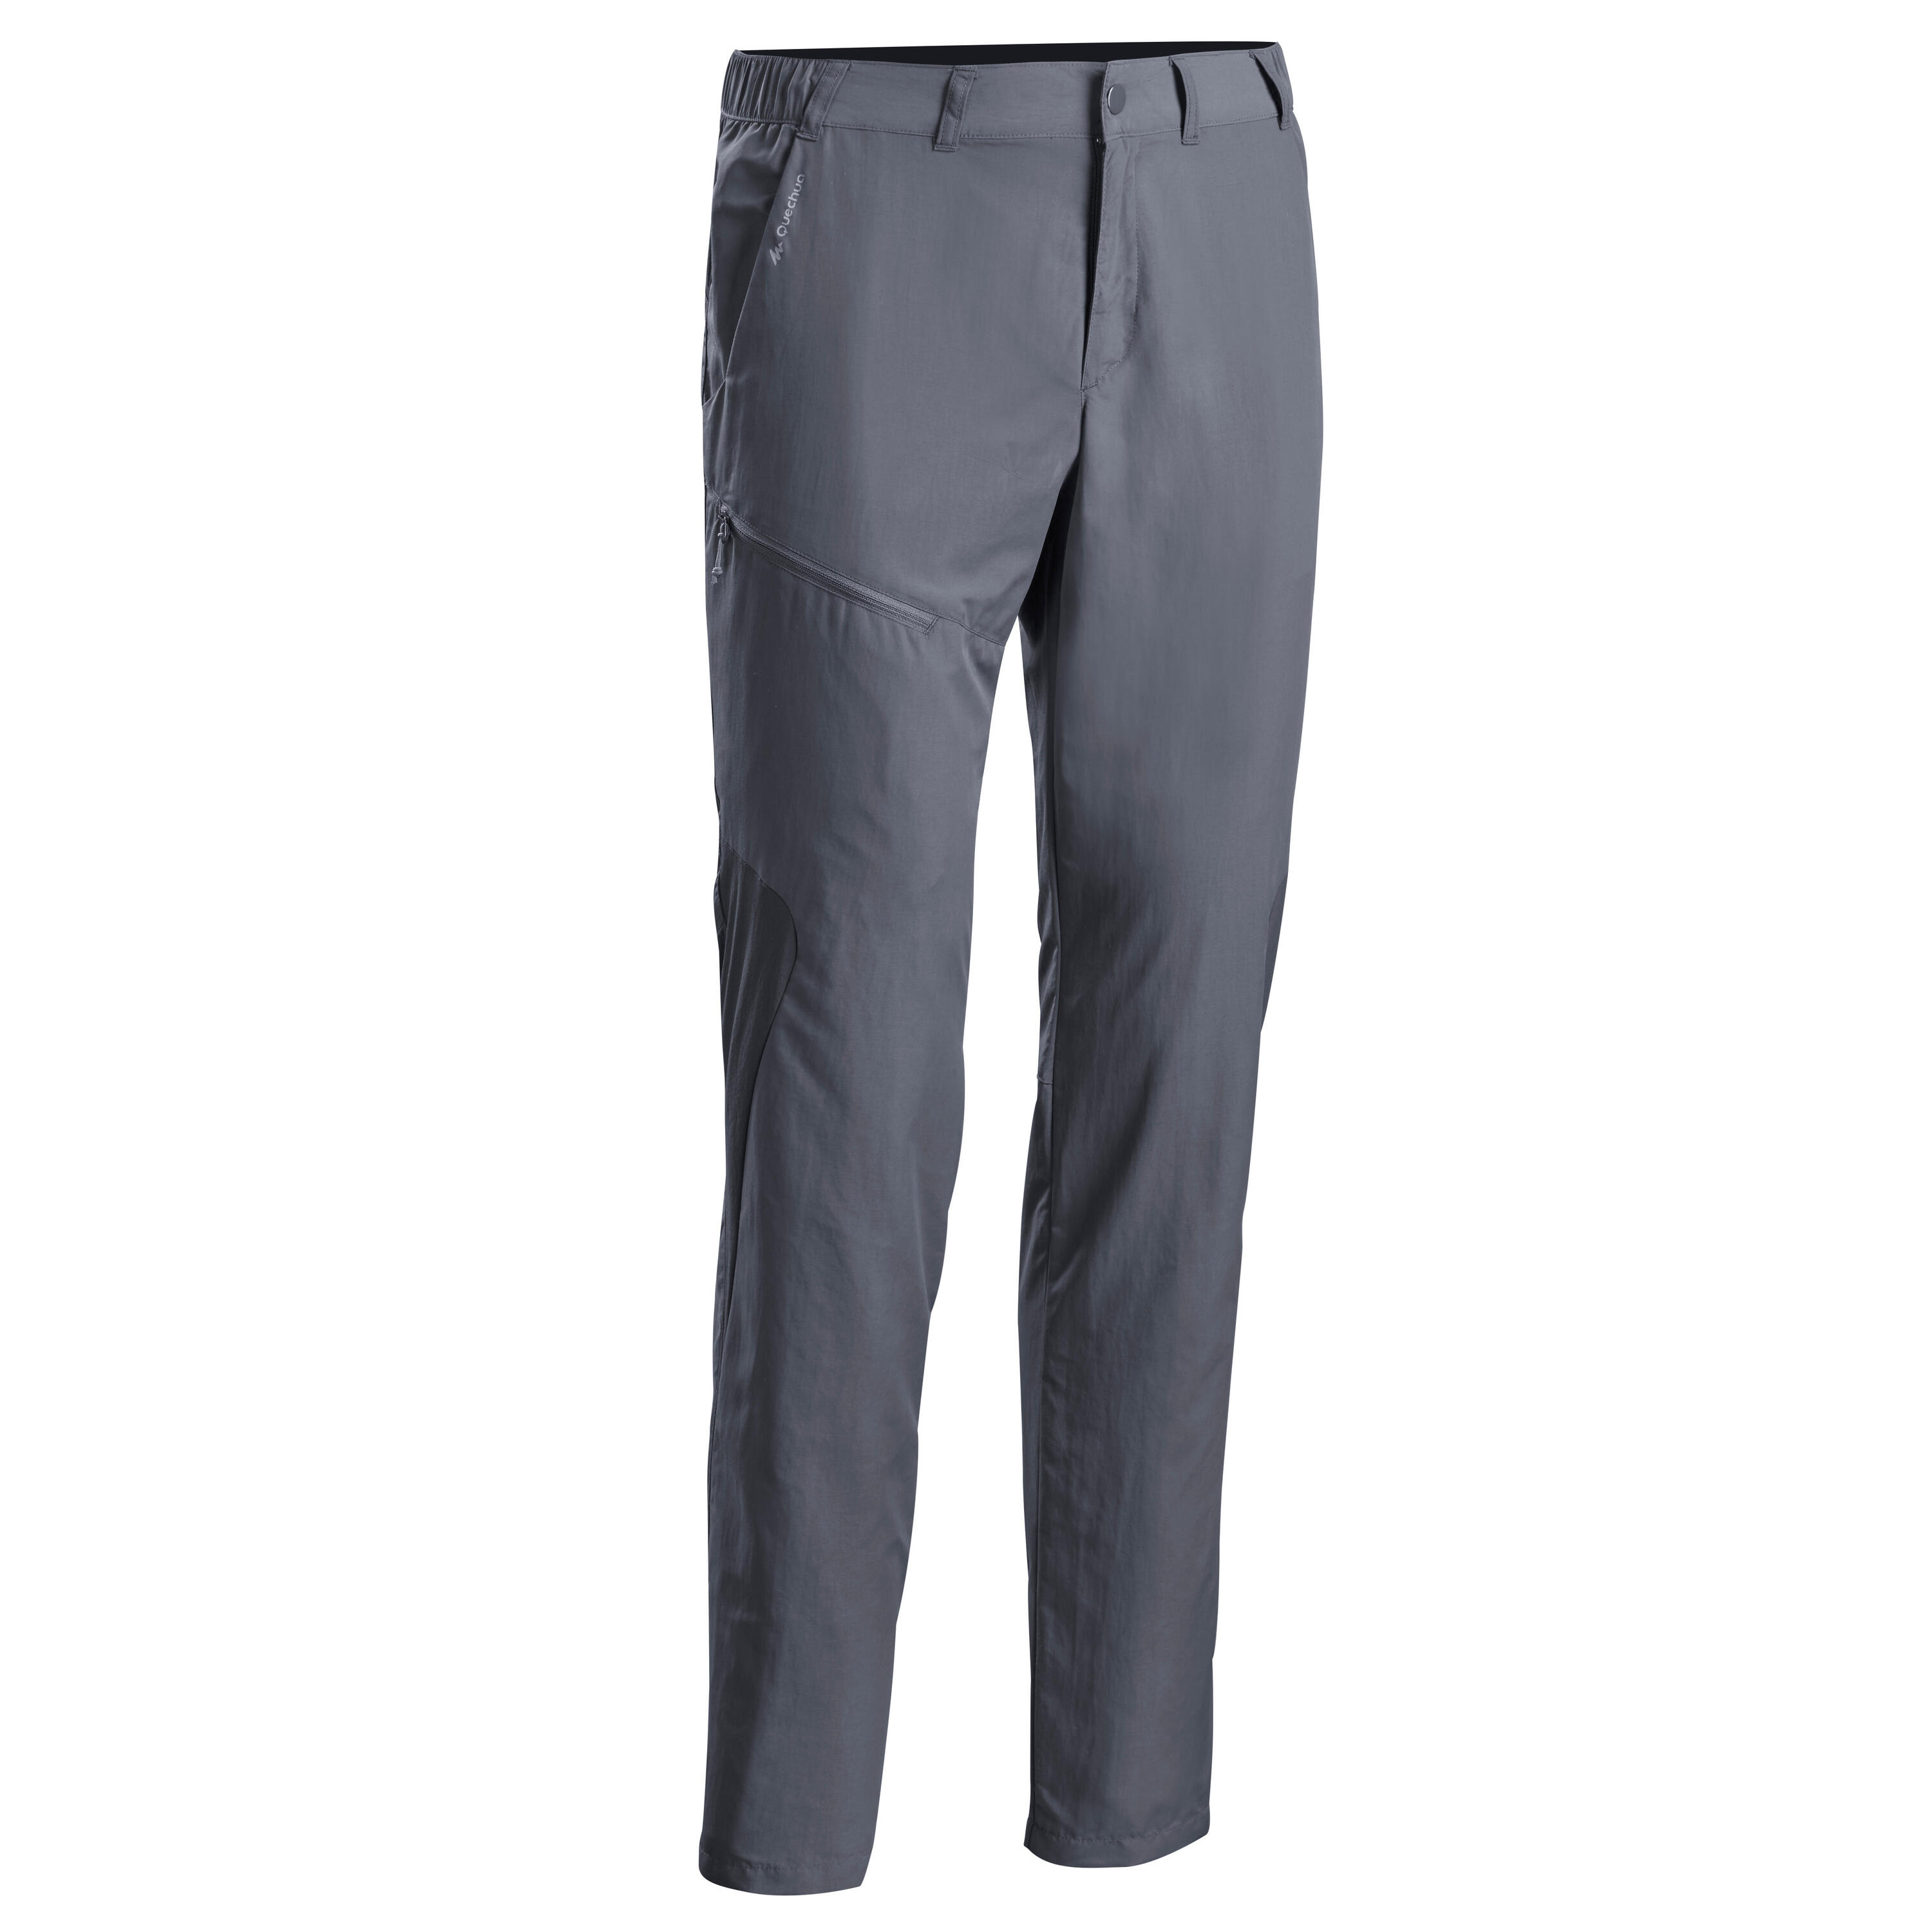 Men's Hiking Trousers - MH100 5/10